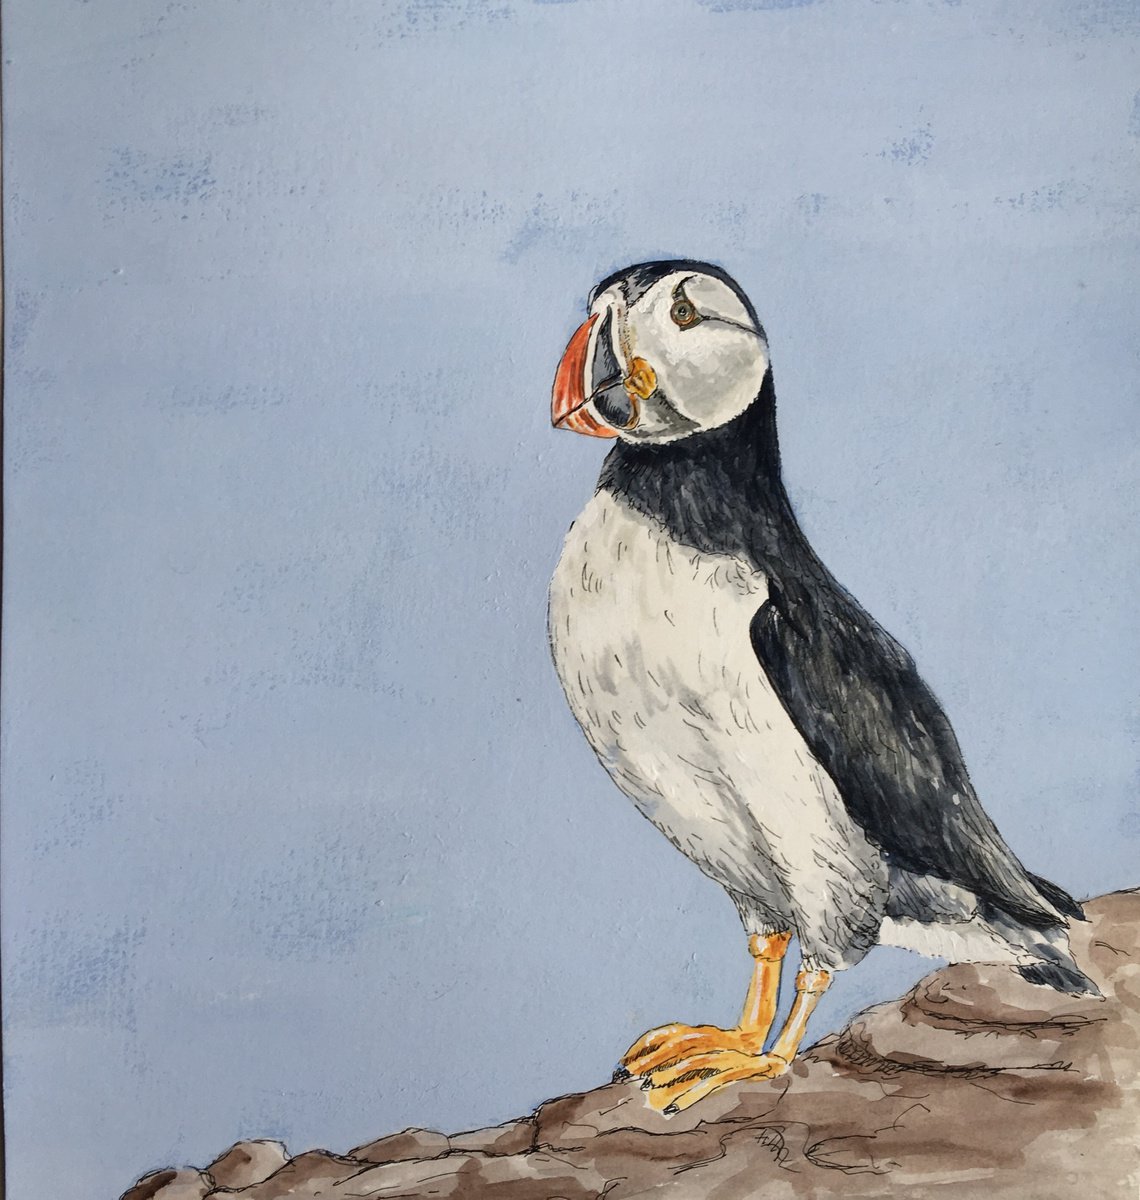 Puffin #1 by Laurence Wheeler